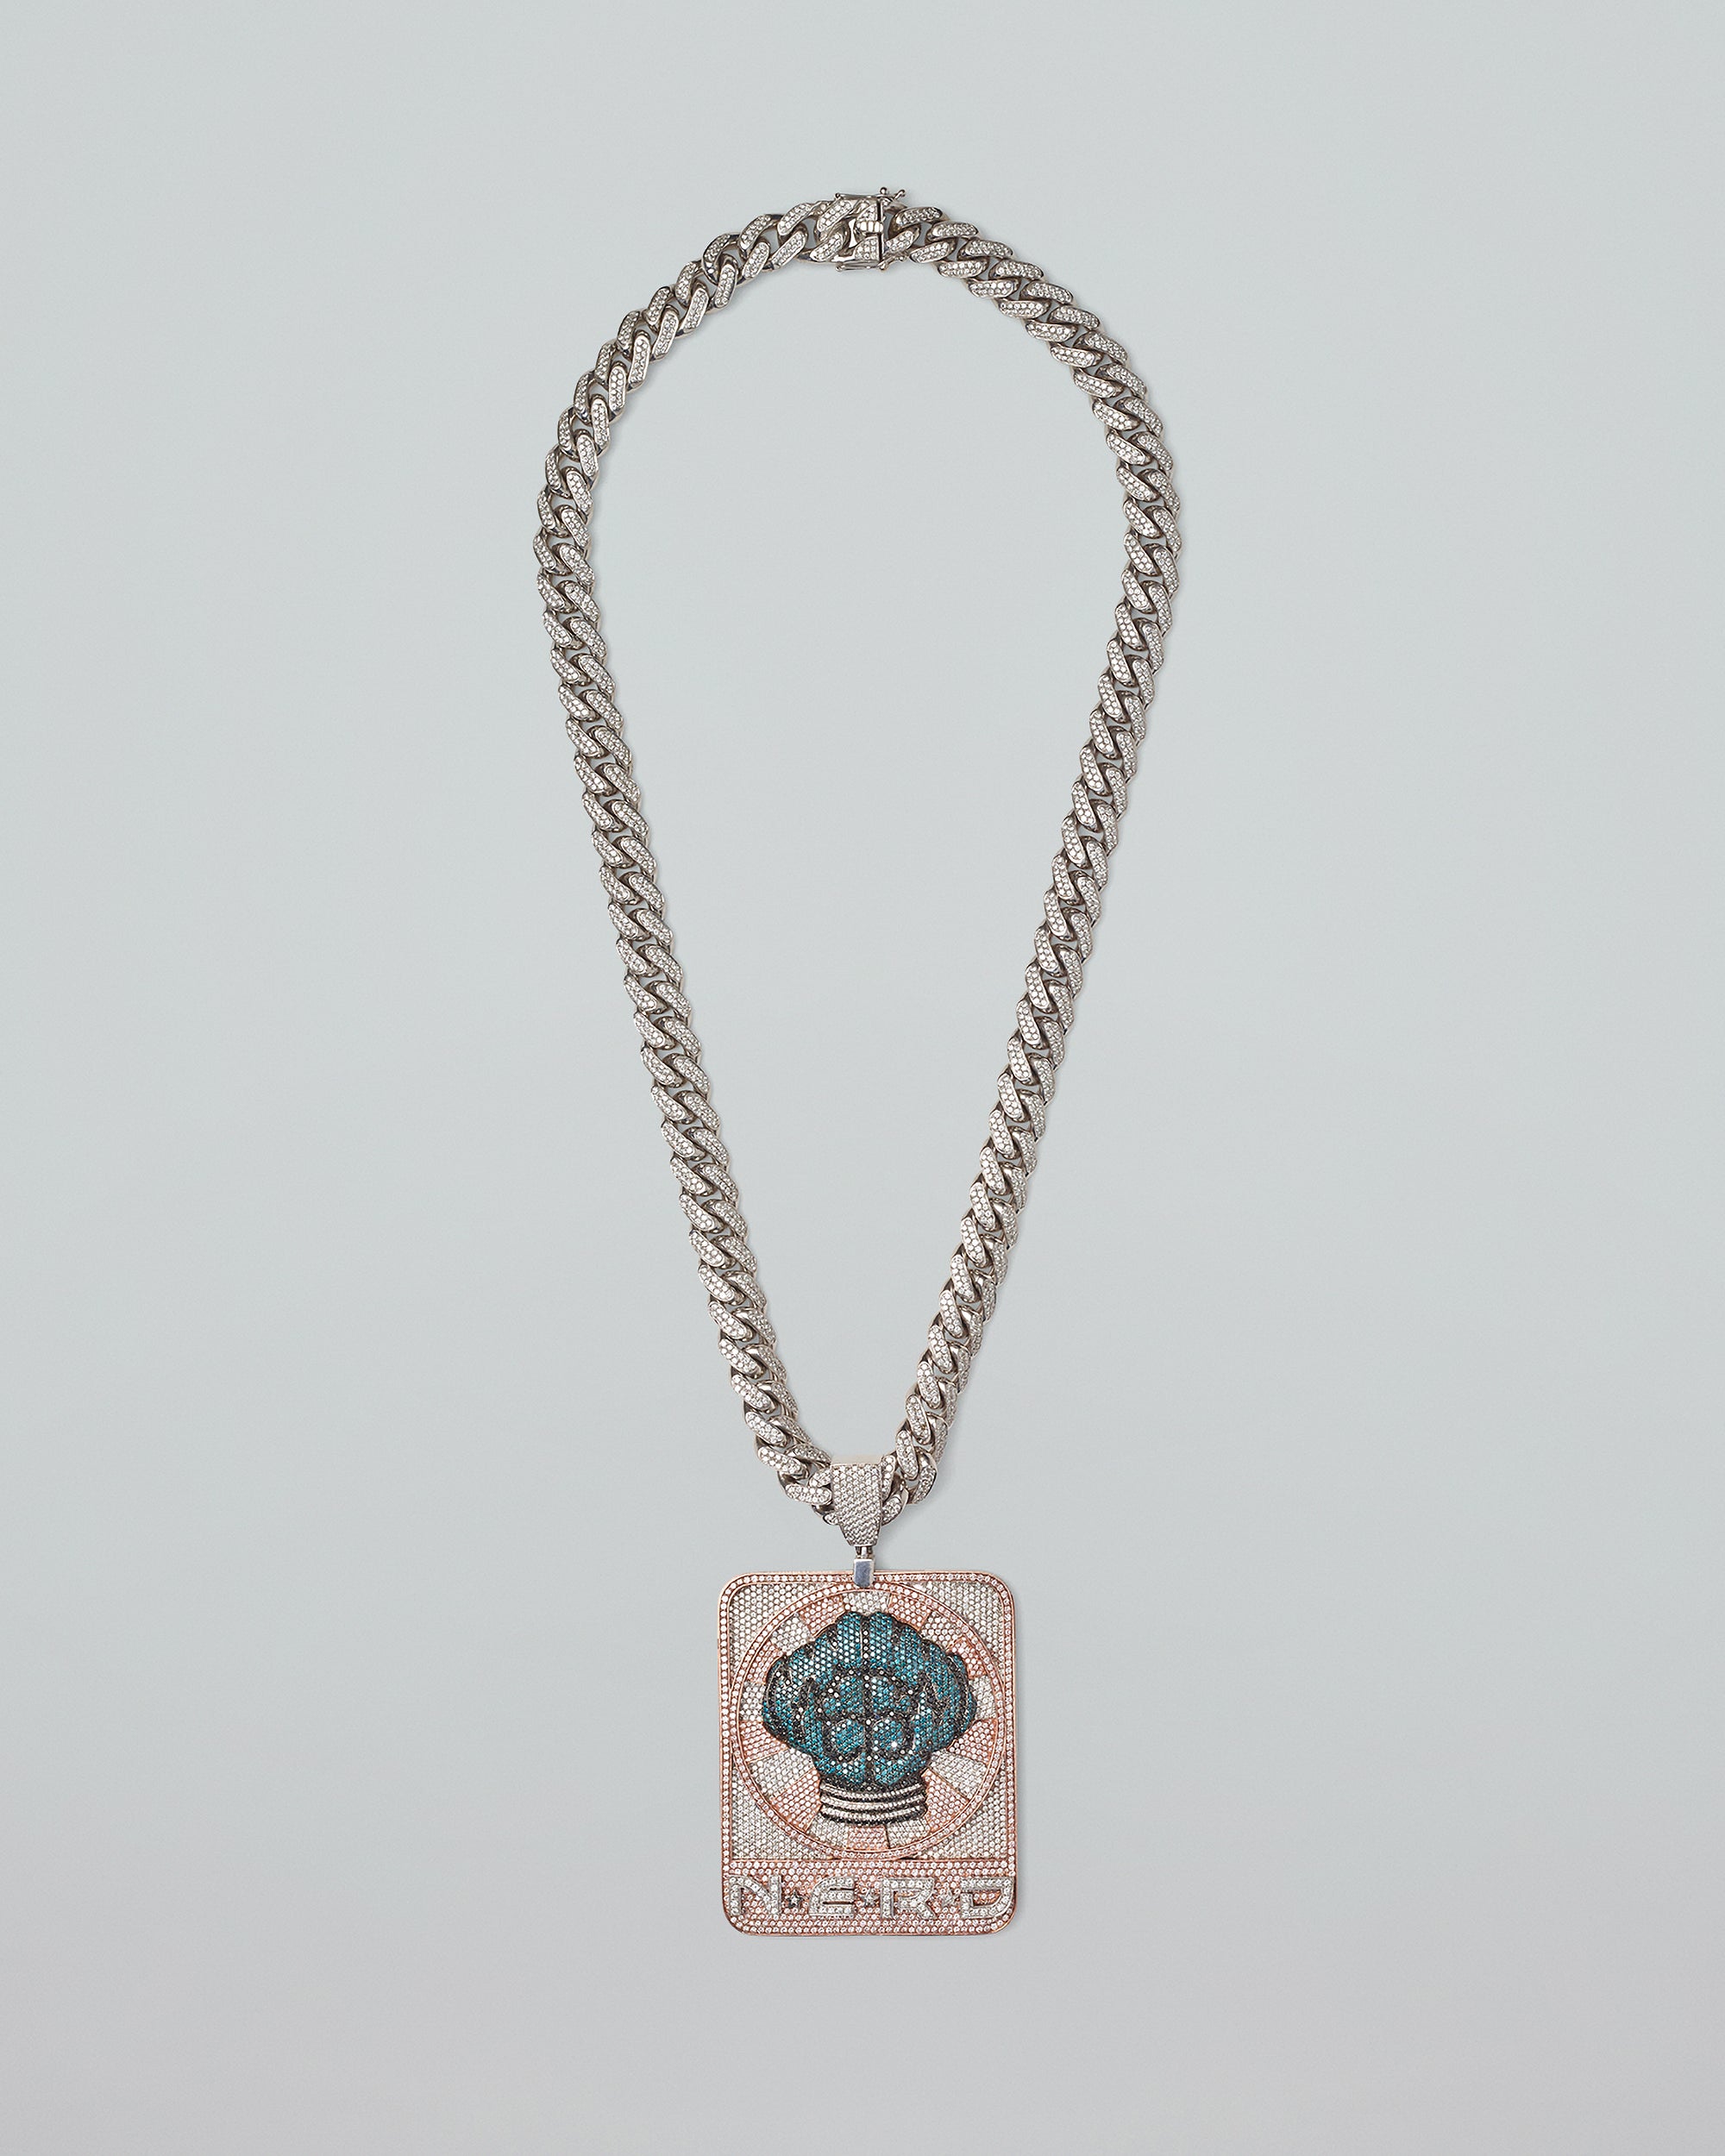 Jacob & Co. N.E.R.D. Character Pendant Chain Sells for Over $2